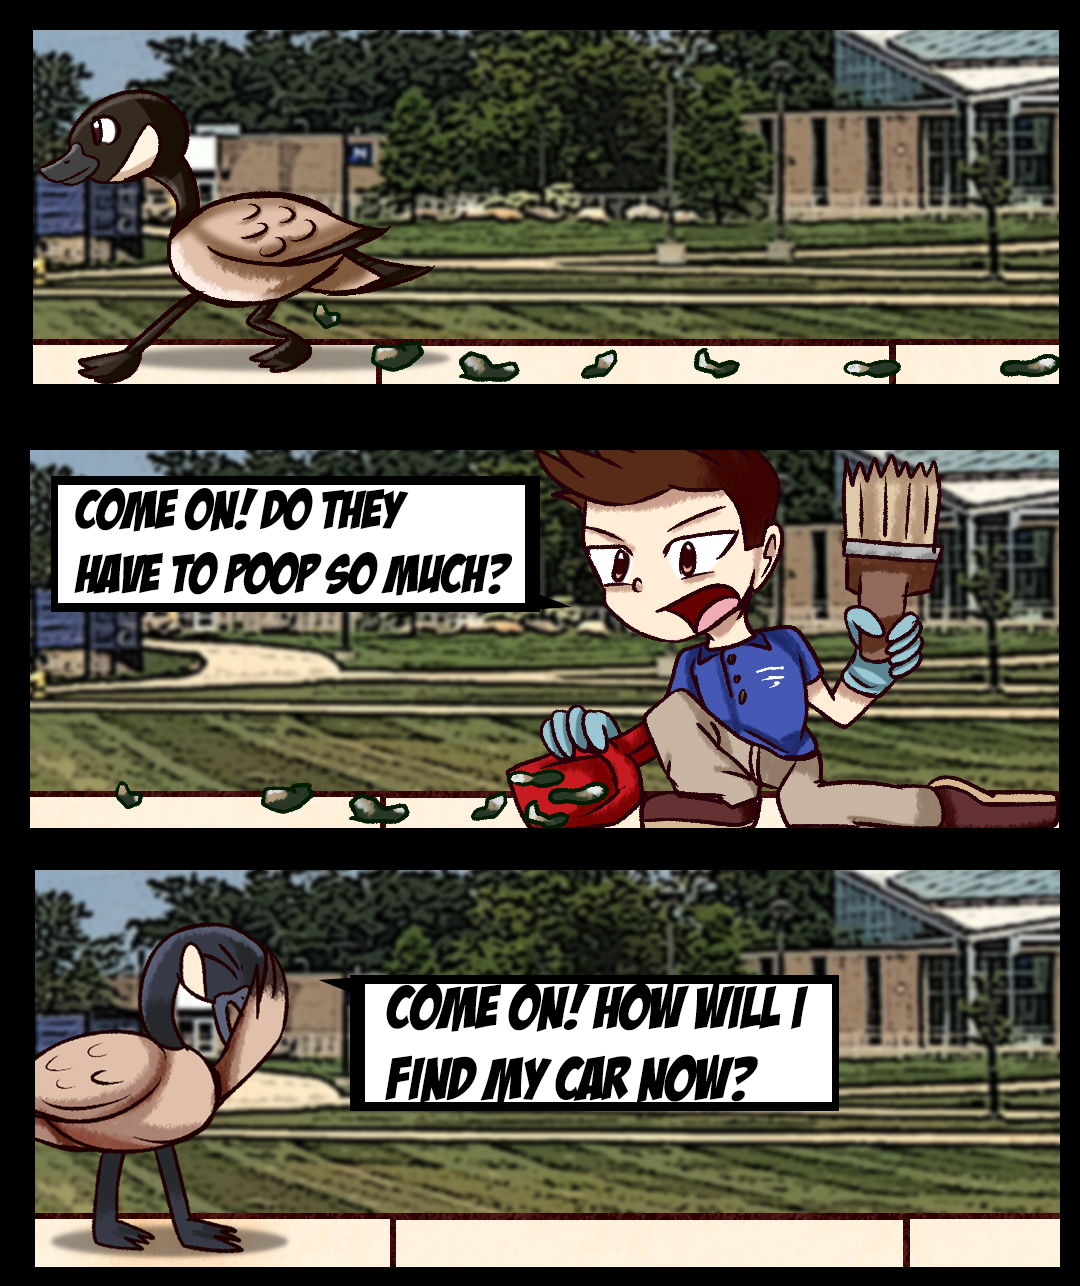 Three-panel comic depicting HFC goose and student